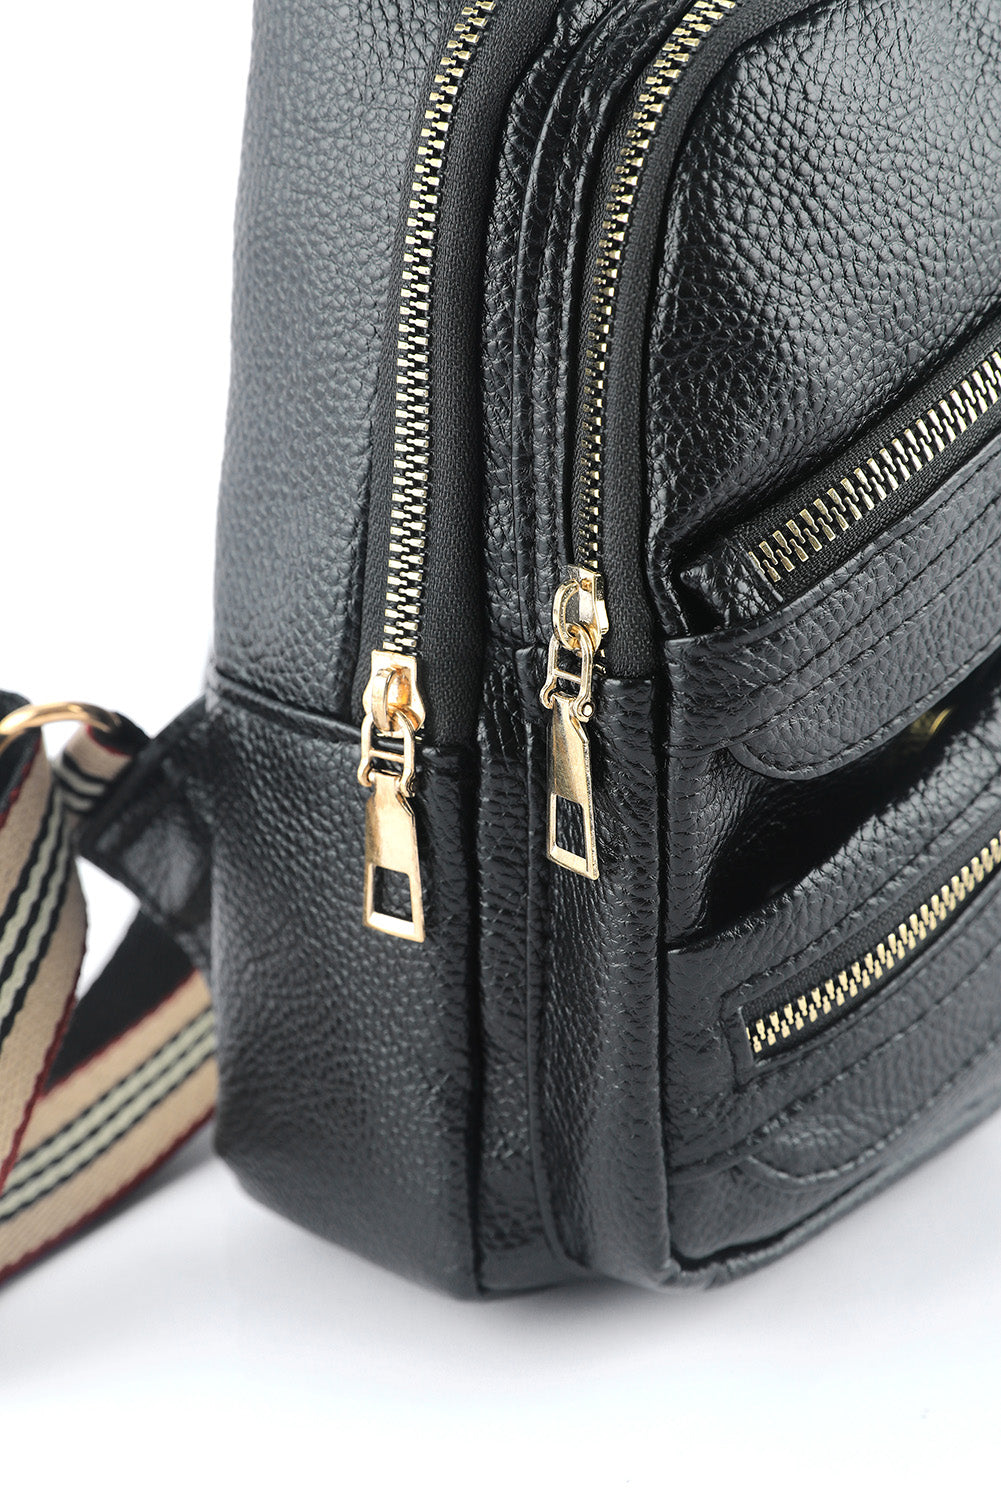 Black Faux Leather Multi-pockets Zipped Chest Bag 